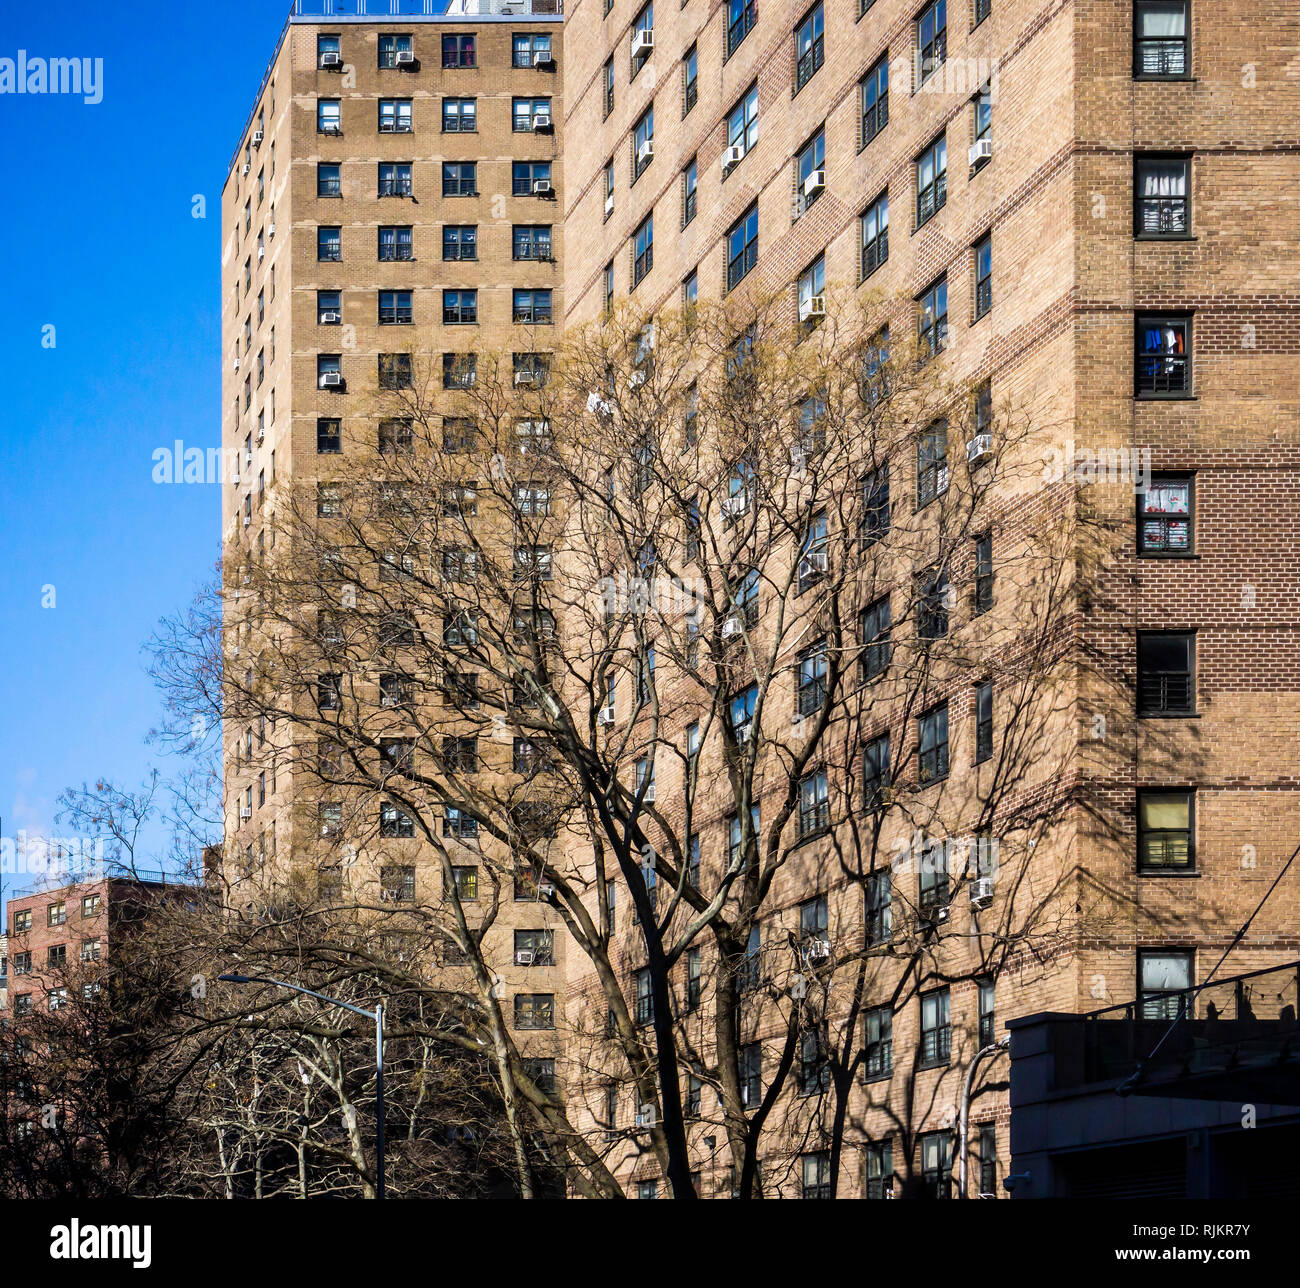 The massive NYCHA Elliot Houses complex of apartments in Chelsea in New York is seen on Thursday, January 31, 2019. NYCHA and HUD are reported to have reached a tentative agreement to oversee the embattled housing authority with a federal monitor. (Â© Richard B. Levine) Stock Photo